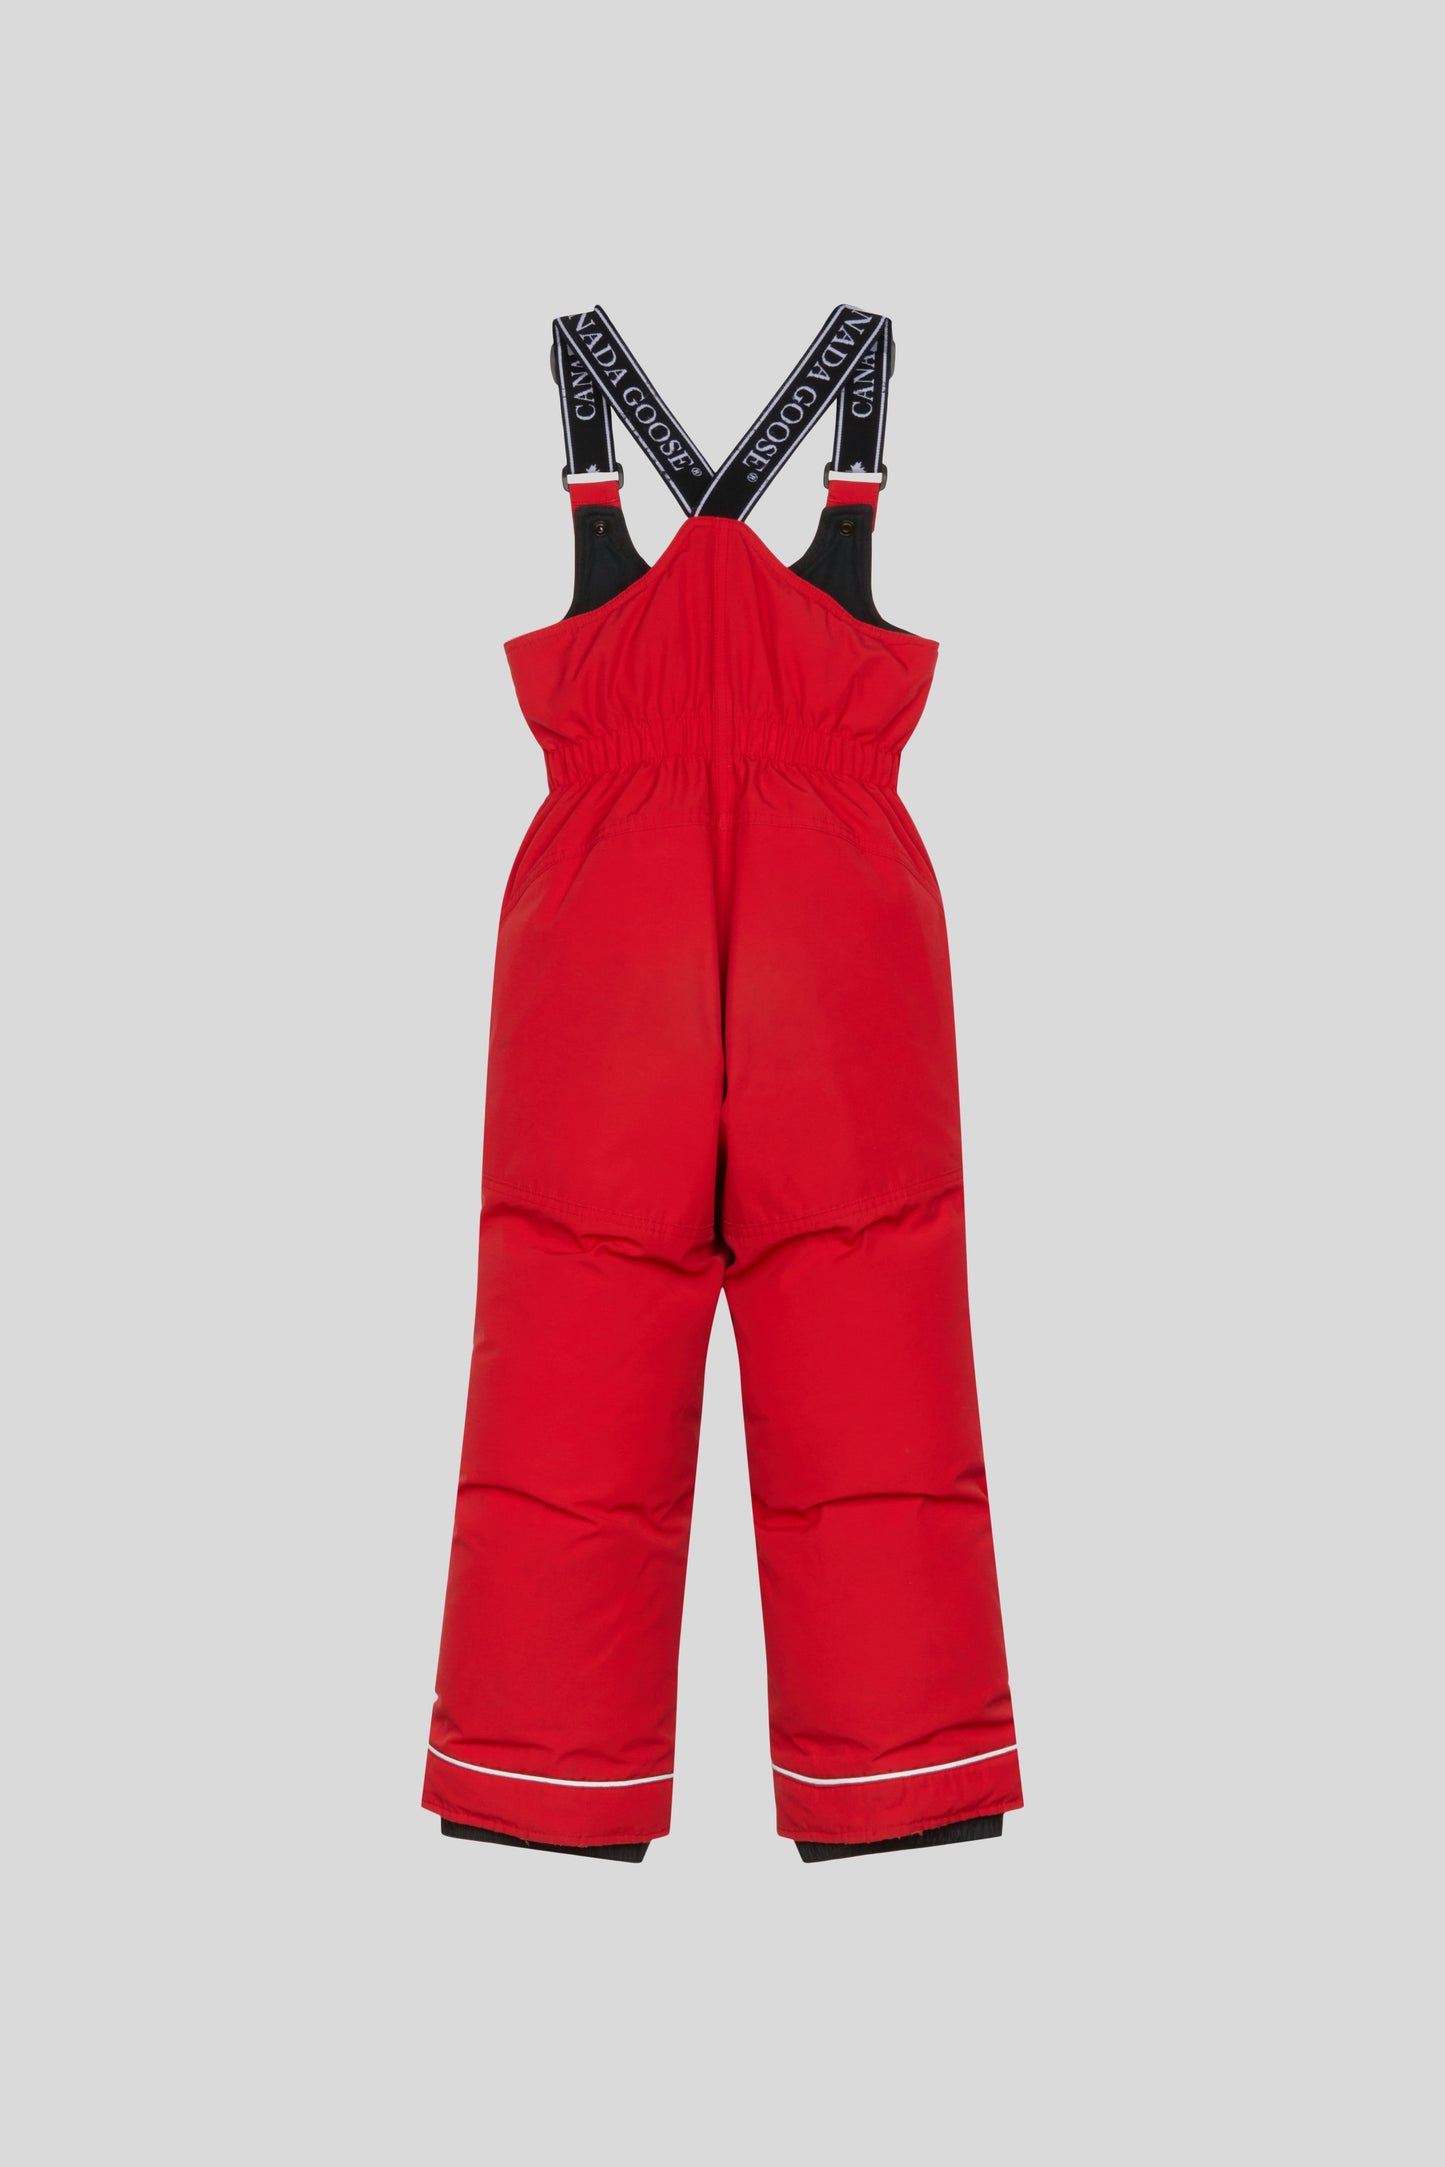 Youth Wolverine Pants